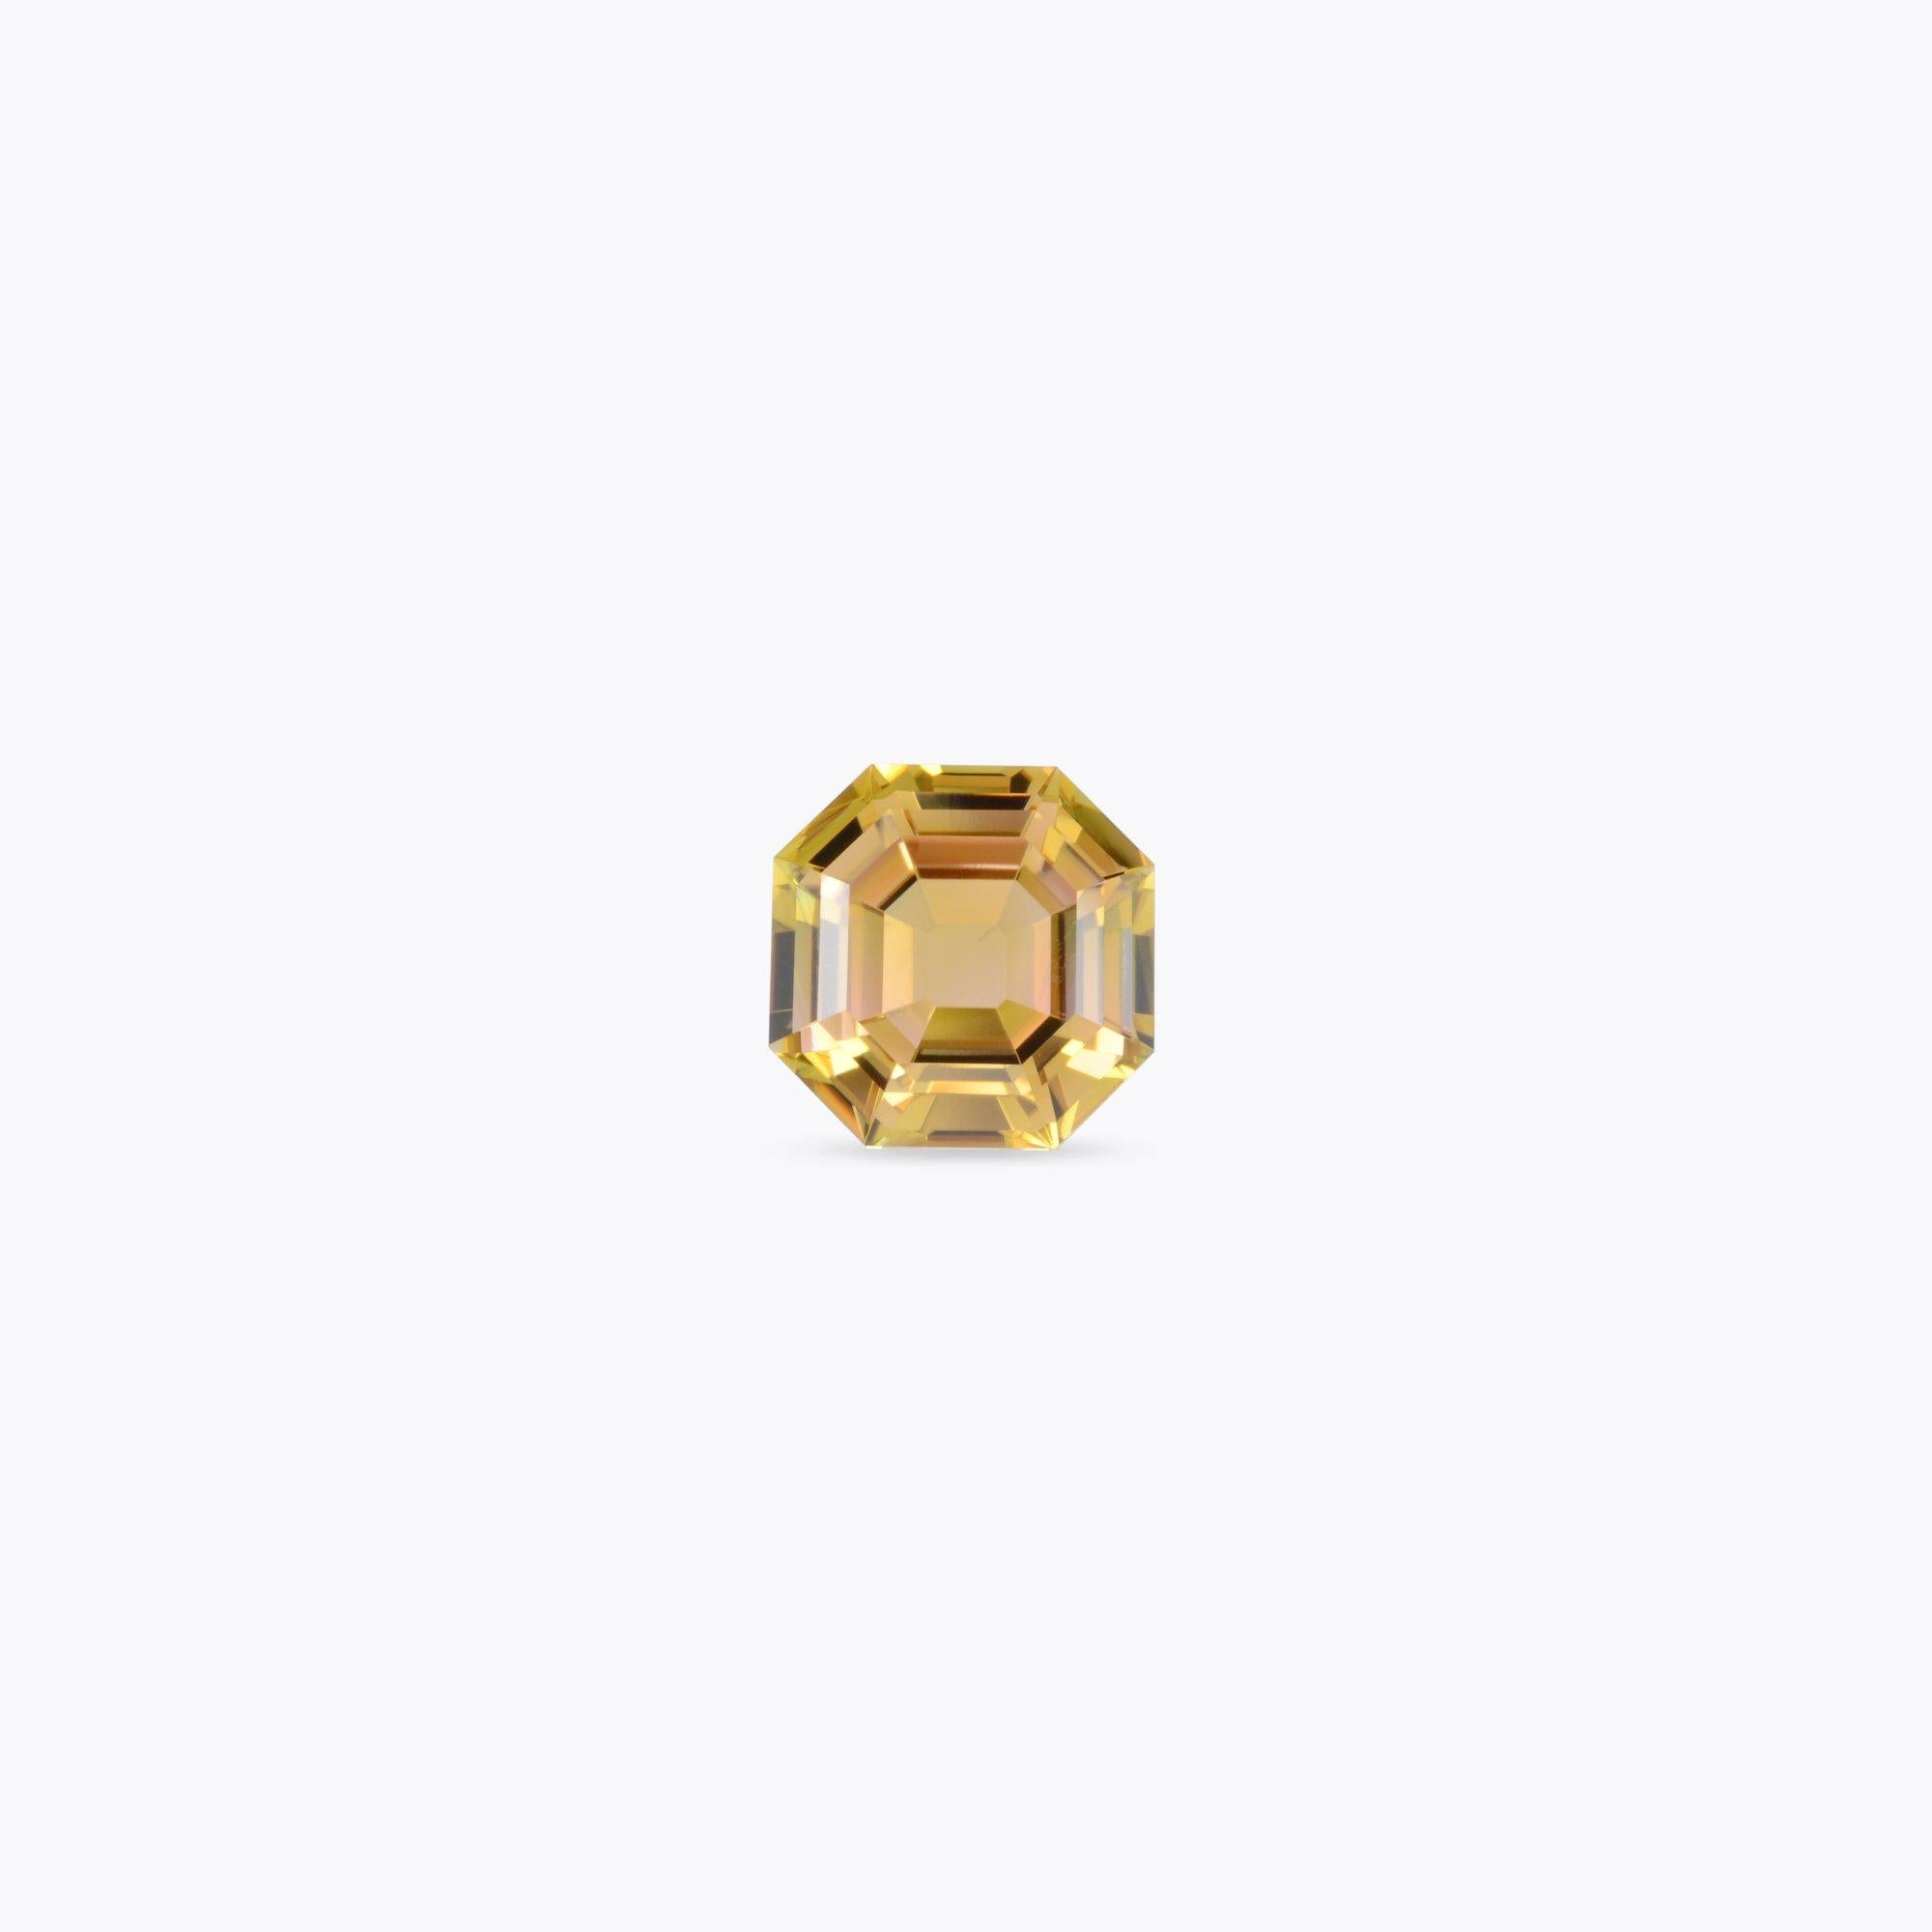 Exclusive 4.47 carat Autumn Bicolor Tourmaline Asscher cut gem, offered loose to a very special lady.
Returns are accepted and paid by us within 7 days of delivery.
We offer supreme custom jewelry work upon request. Please contact us for more